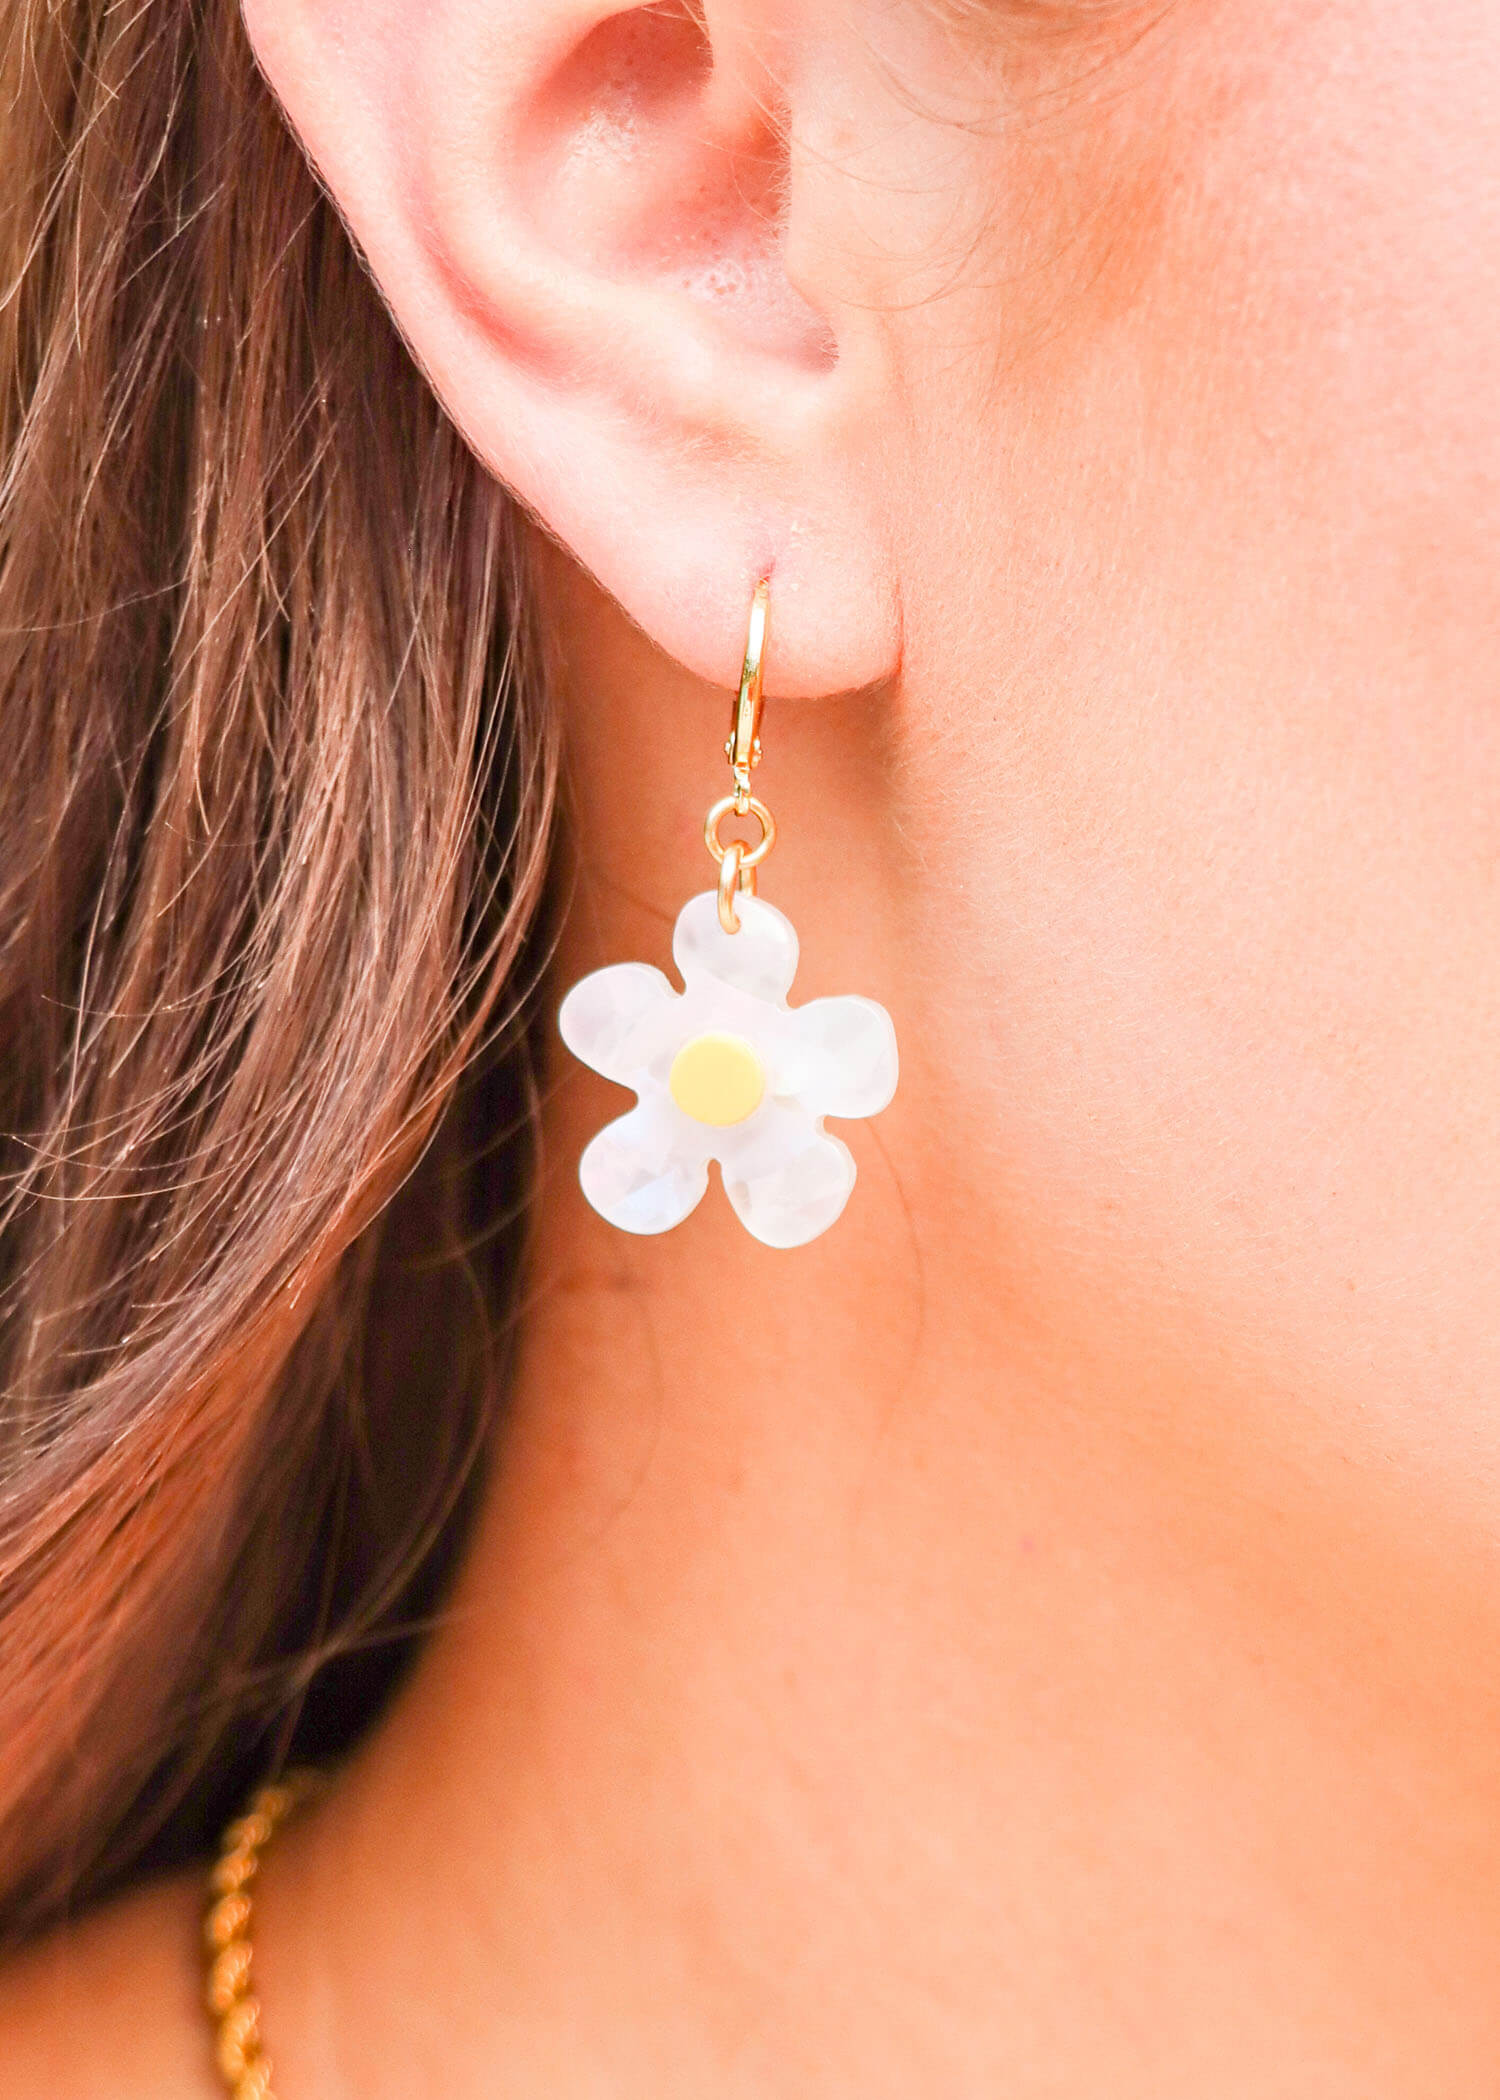 Picking Daisies Earrings - Gold/White Earrings MerciGrace Boutique.